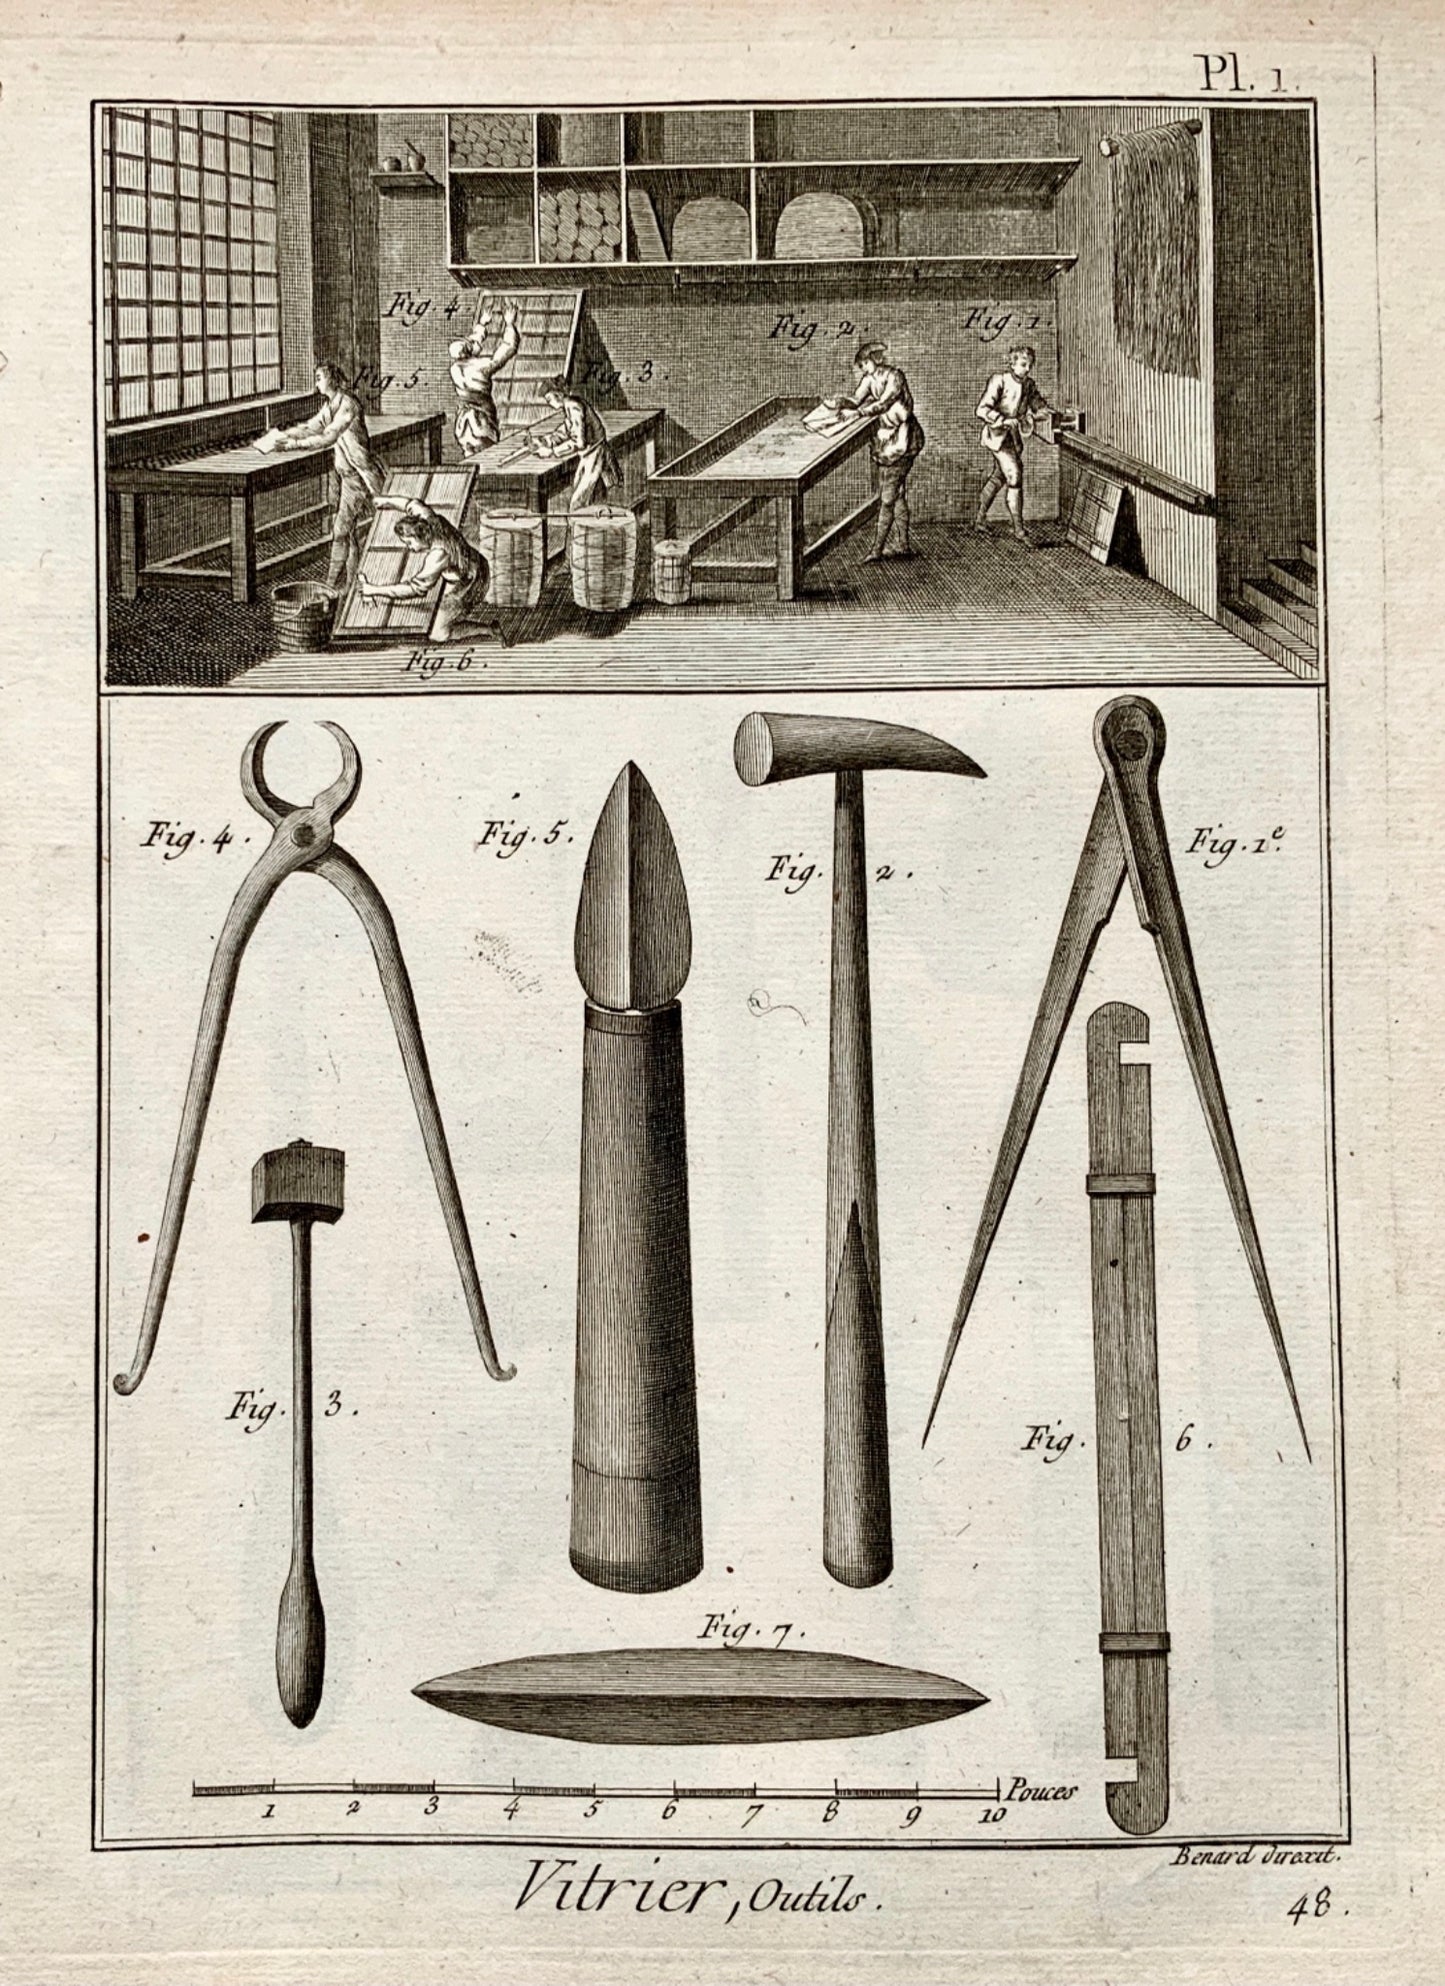 1787 GLAZIER - Vitrier - Set of 8 engravings on the Fitting of Glass - Trades